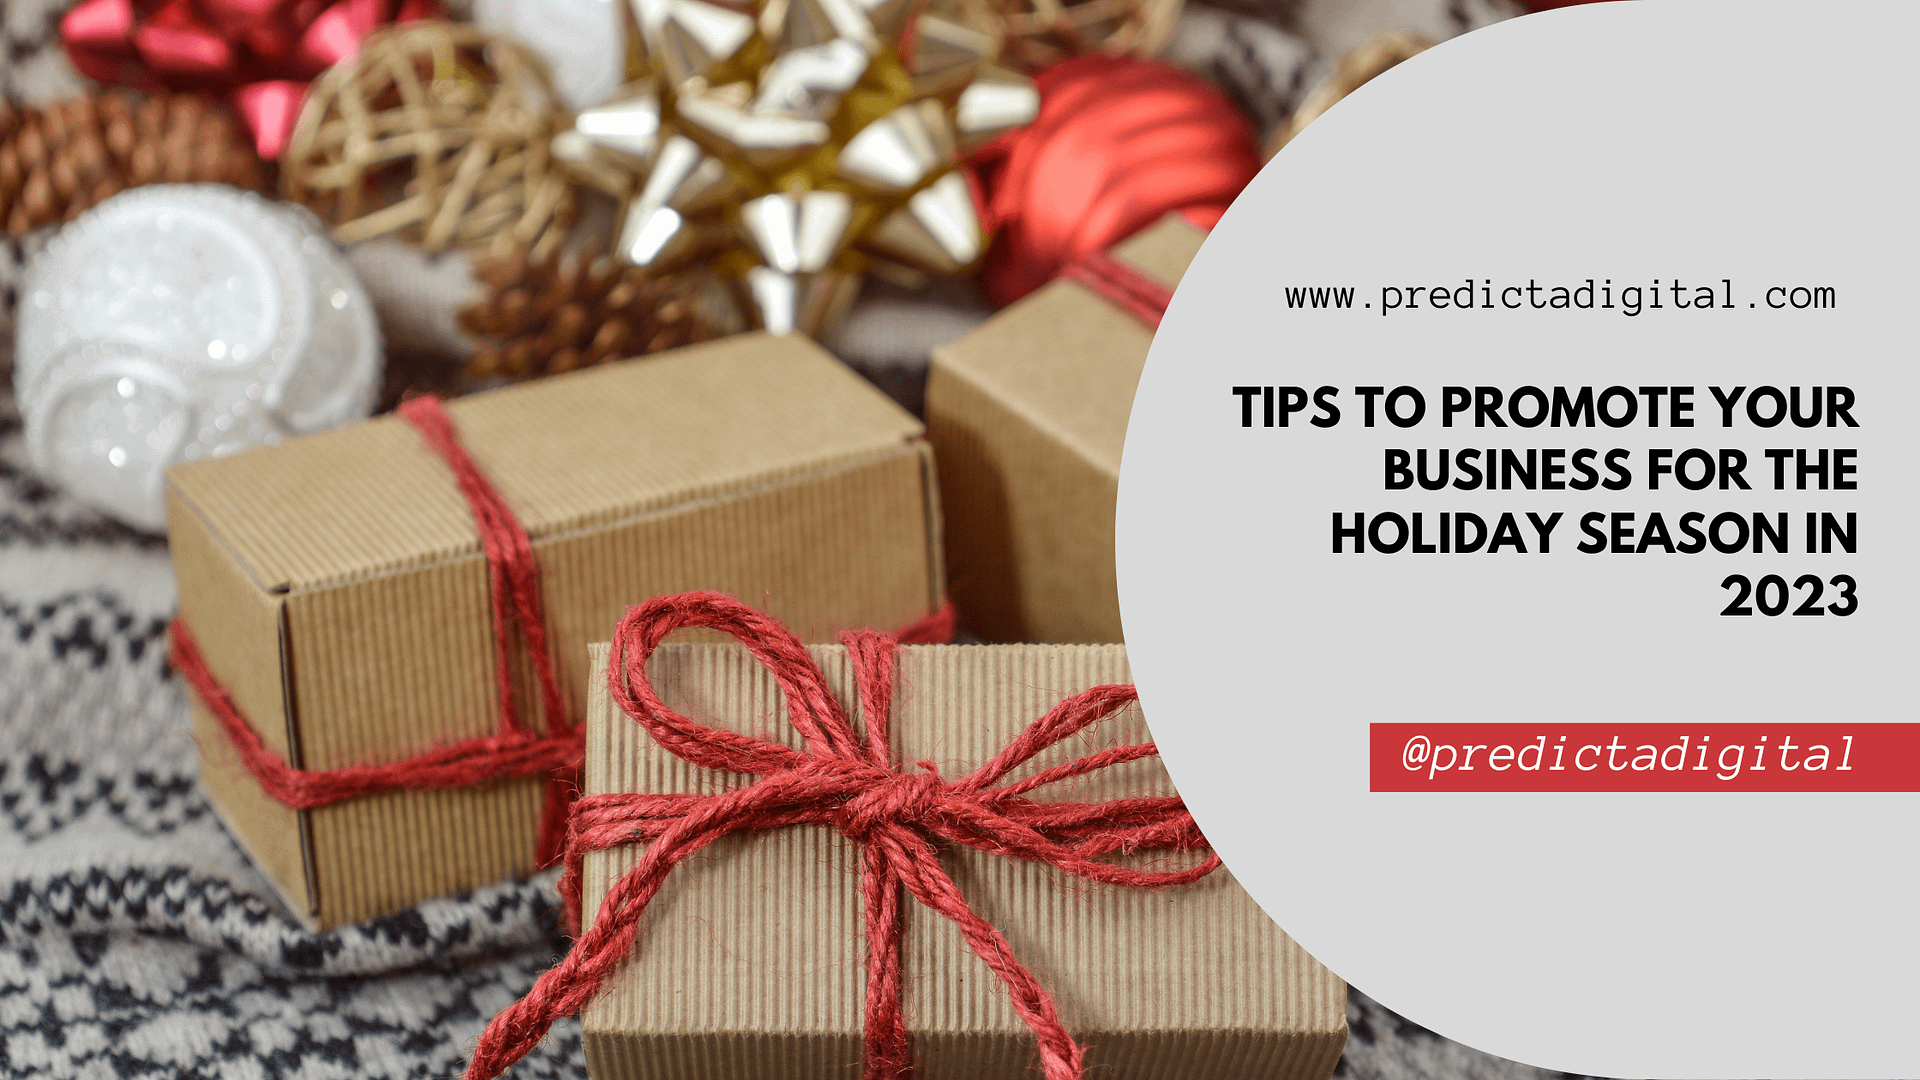 Tips to Promote Your Business for the Holiday Season in 2023